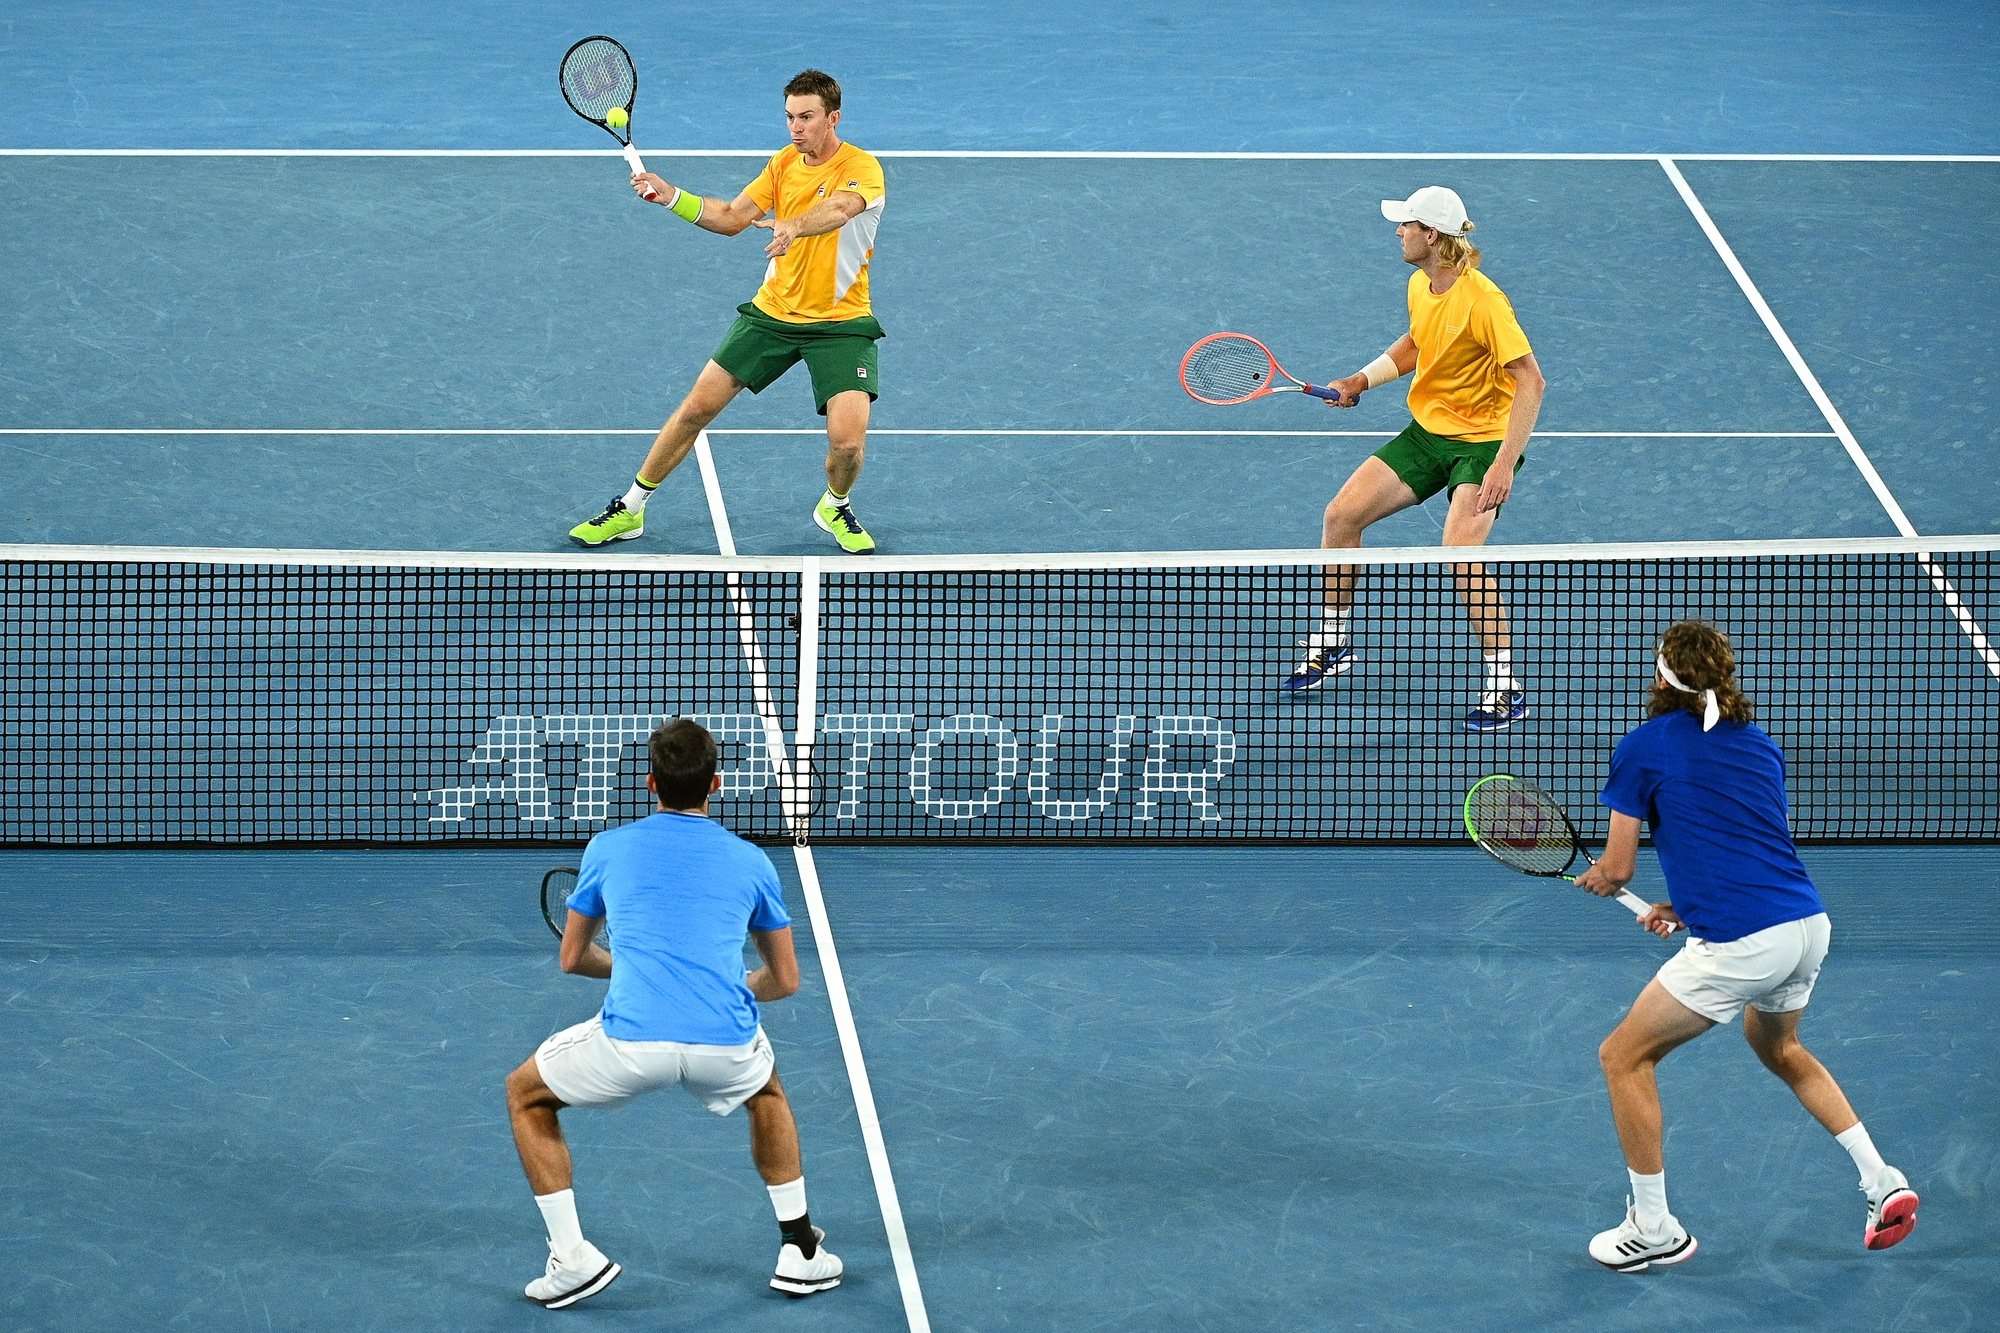 epa08984230 John Peers (back L) and Luke Saville (back R) of Australia in action against Stefanos Tsitsipas (front R) and Michail Pervolarakas (front L) of Greece during their doubles group stage match of the ATP Cup tennis tournament at Melbourne Park in Melbourne, Australia, 03 February 2021.  EPA/DEAN LEWINS AUSTRALIA AND NEW ZEALAND OUT